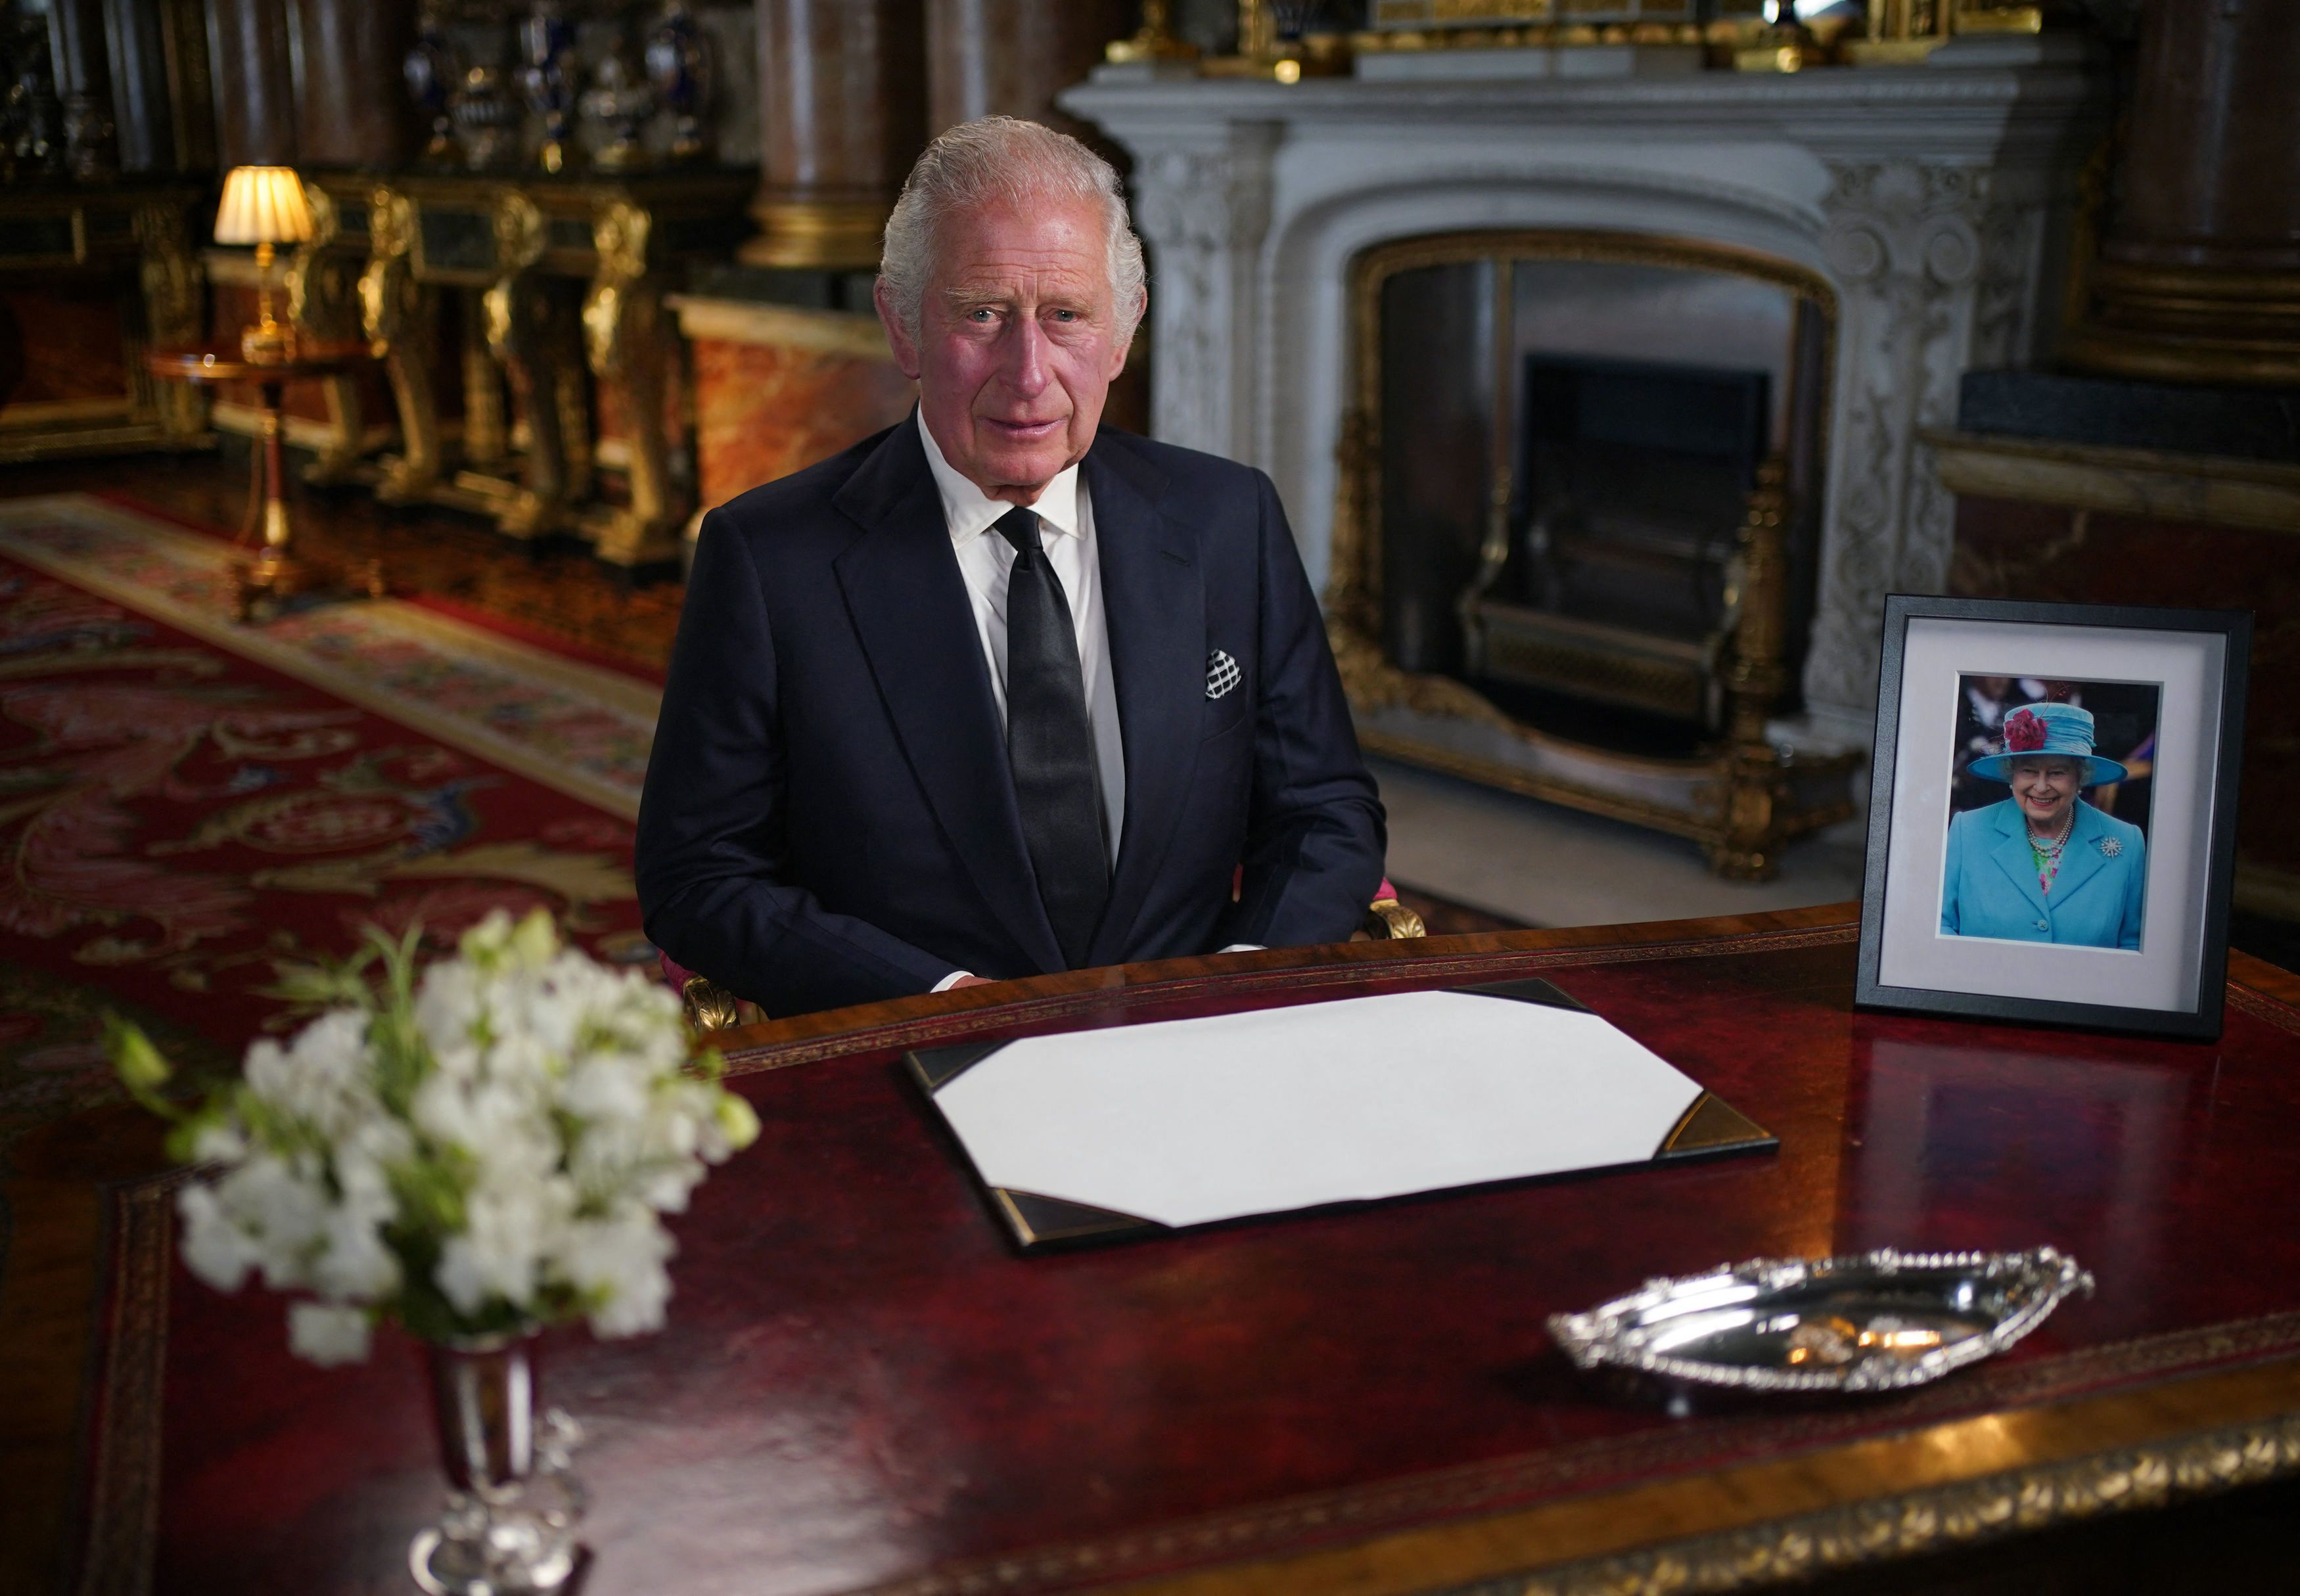 10 interesting facts about King Charles III, the new British monarch